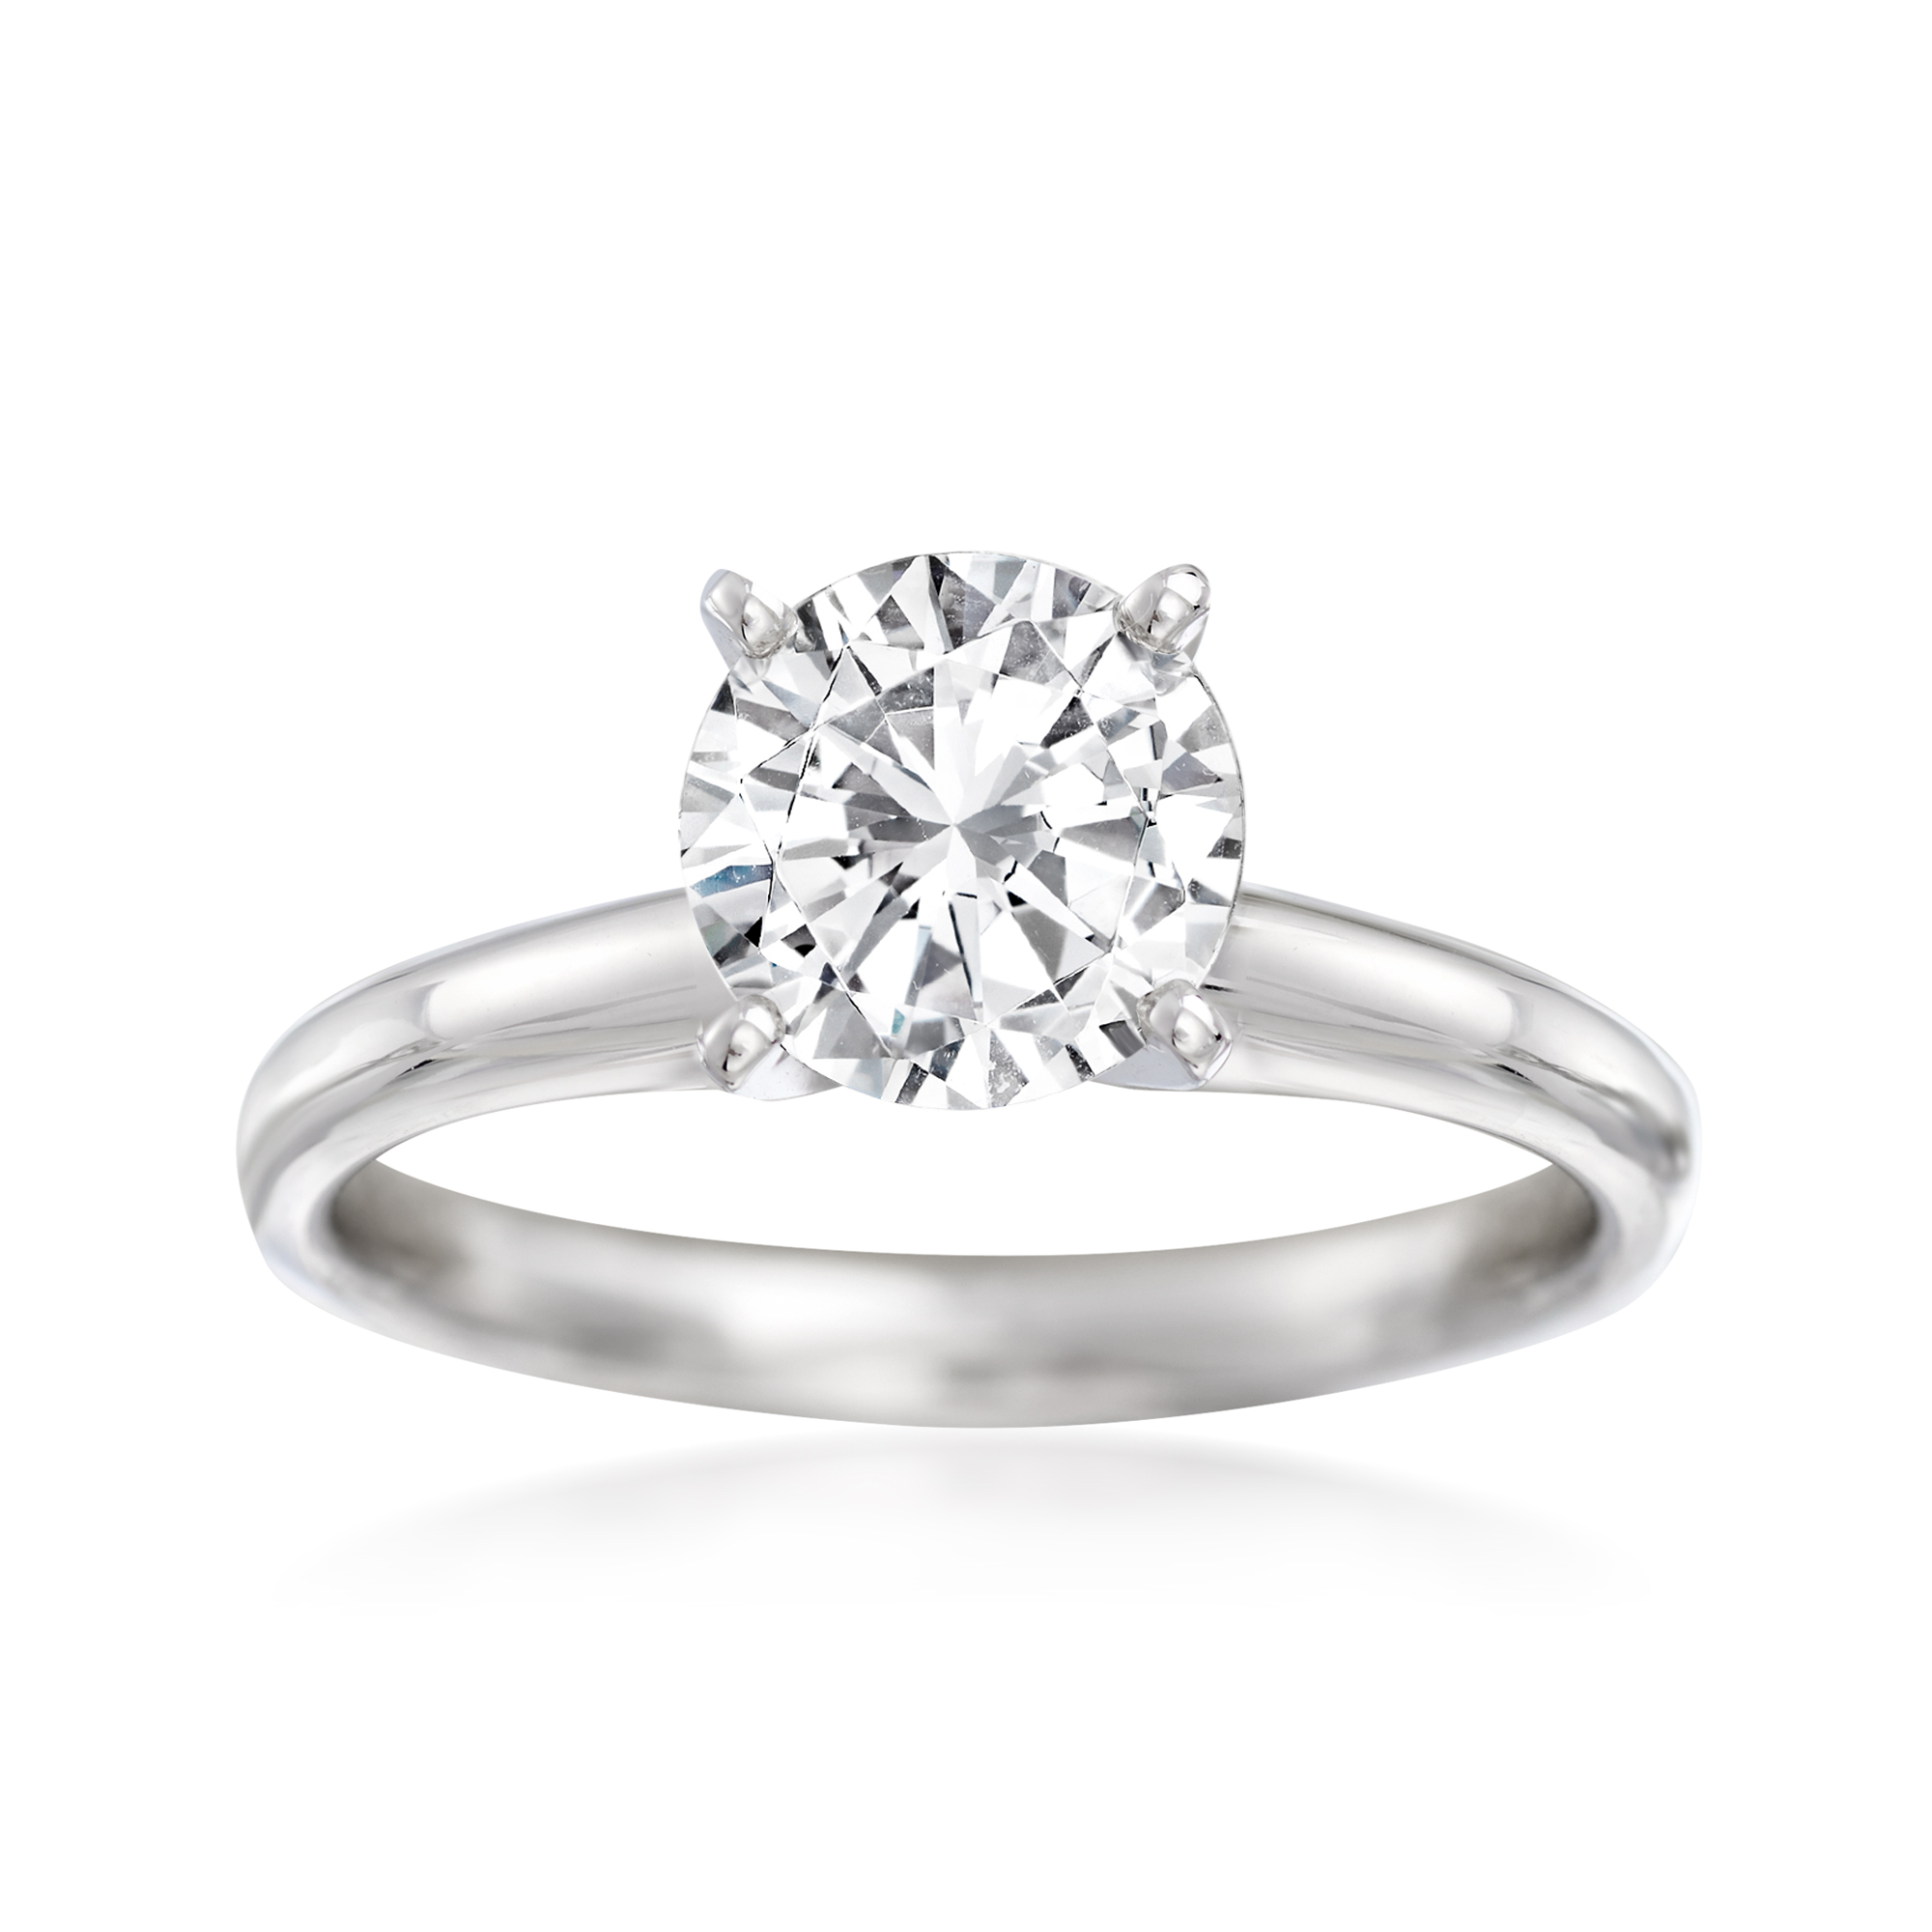 1.50 Ct Round Cut Solitaire Diamond Engagement Wedding Ring 14k White Gold Over 